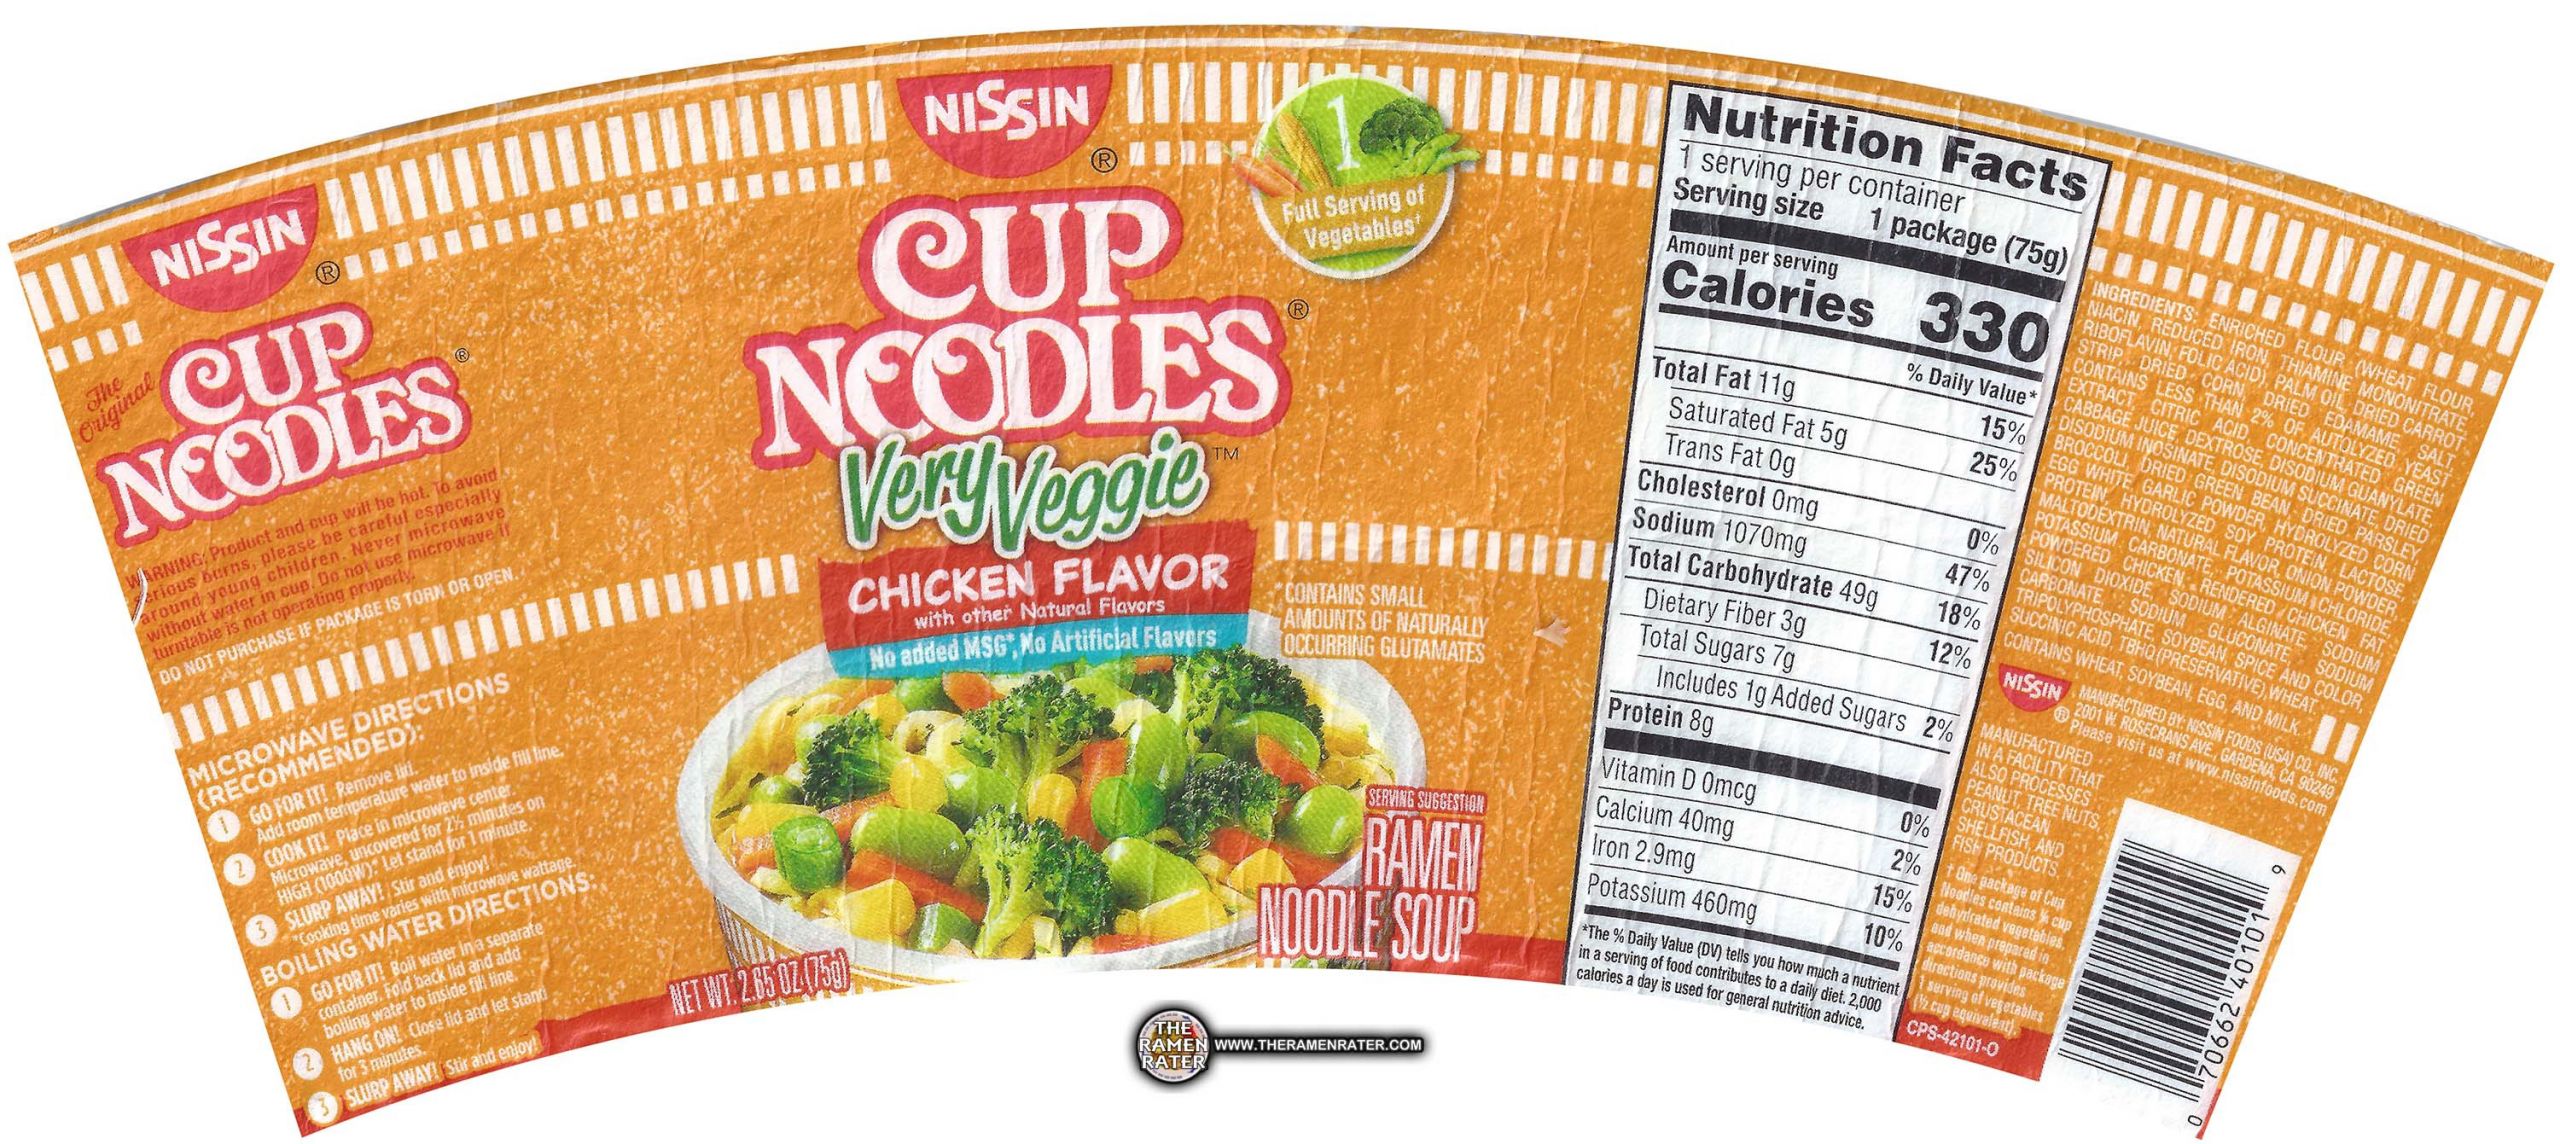 35 Best Microwave Cup Noodles – Home, Family, Style and Art Ideas